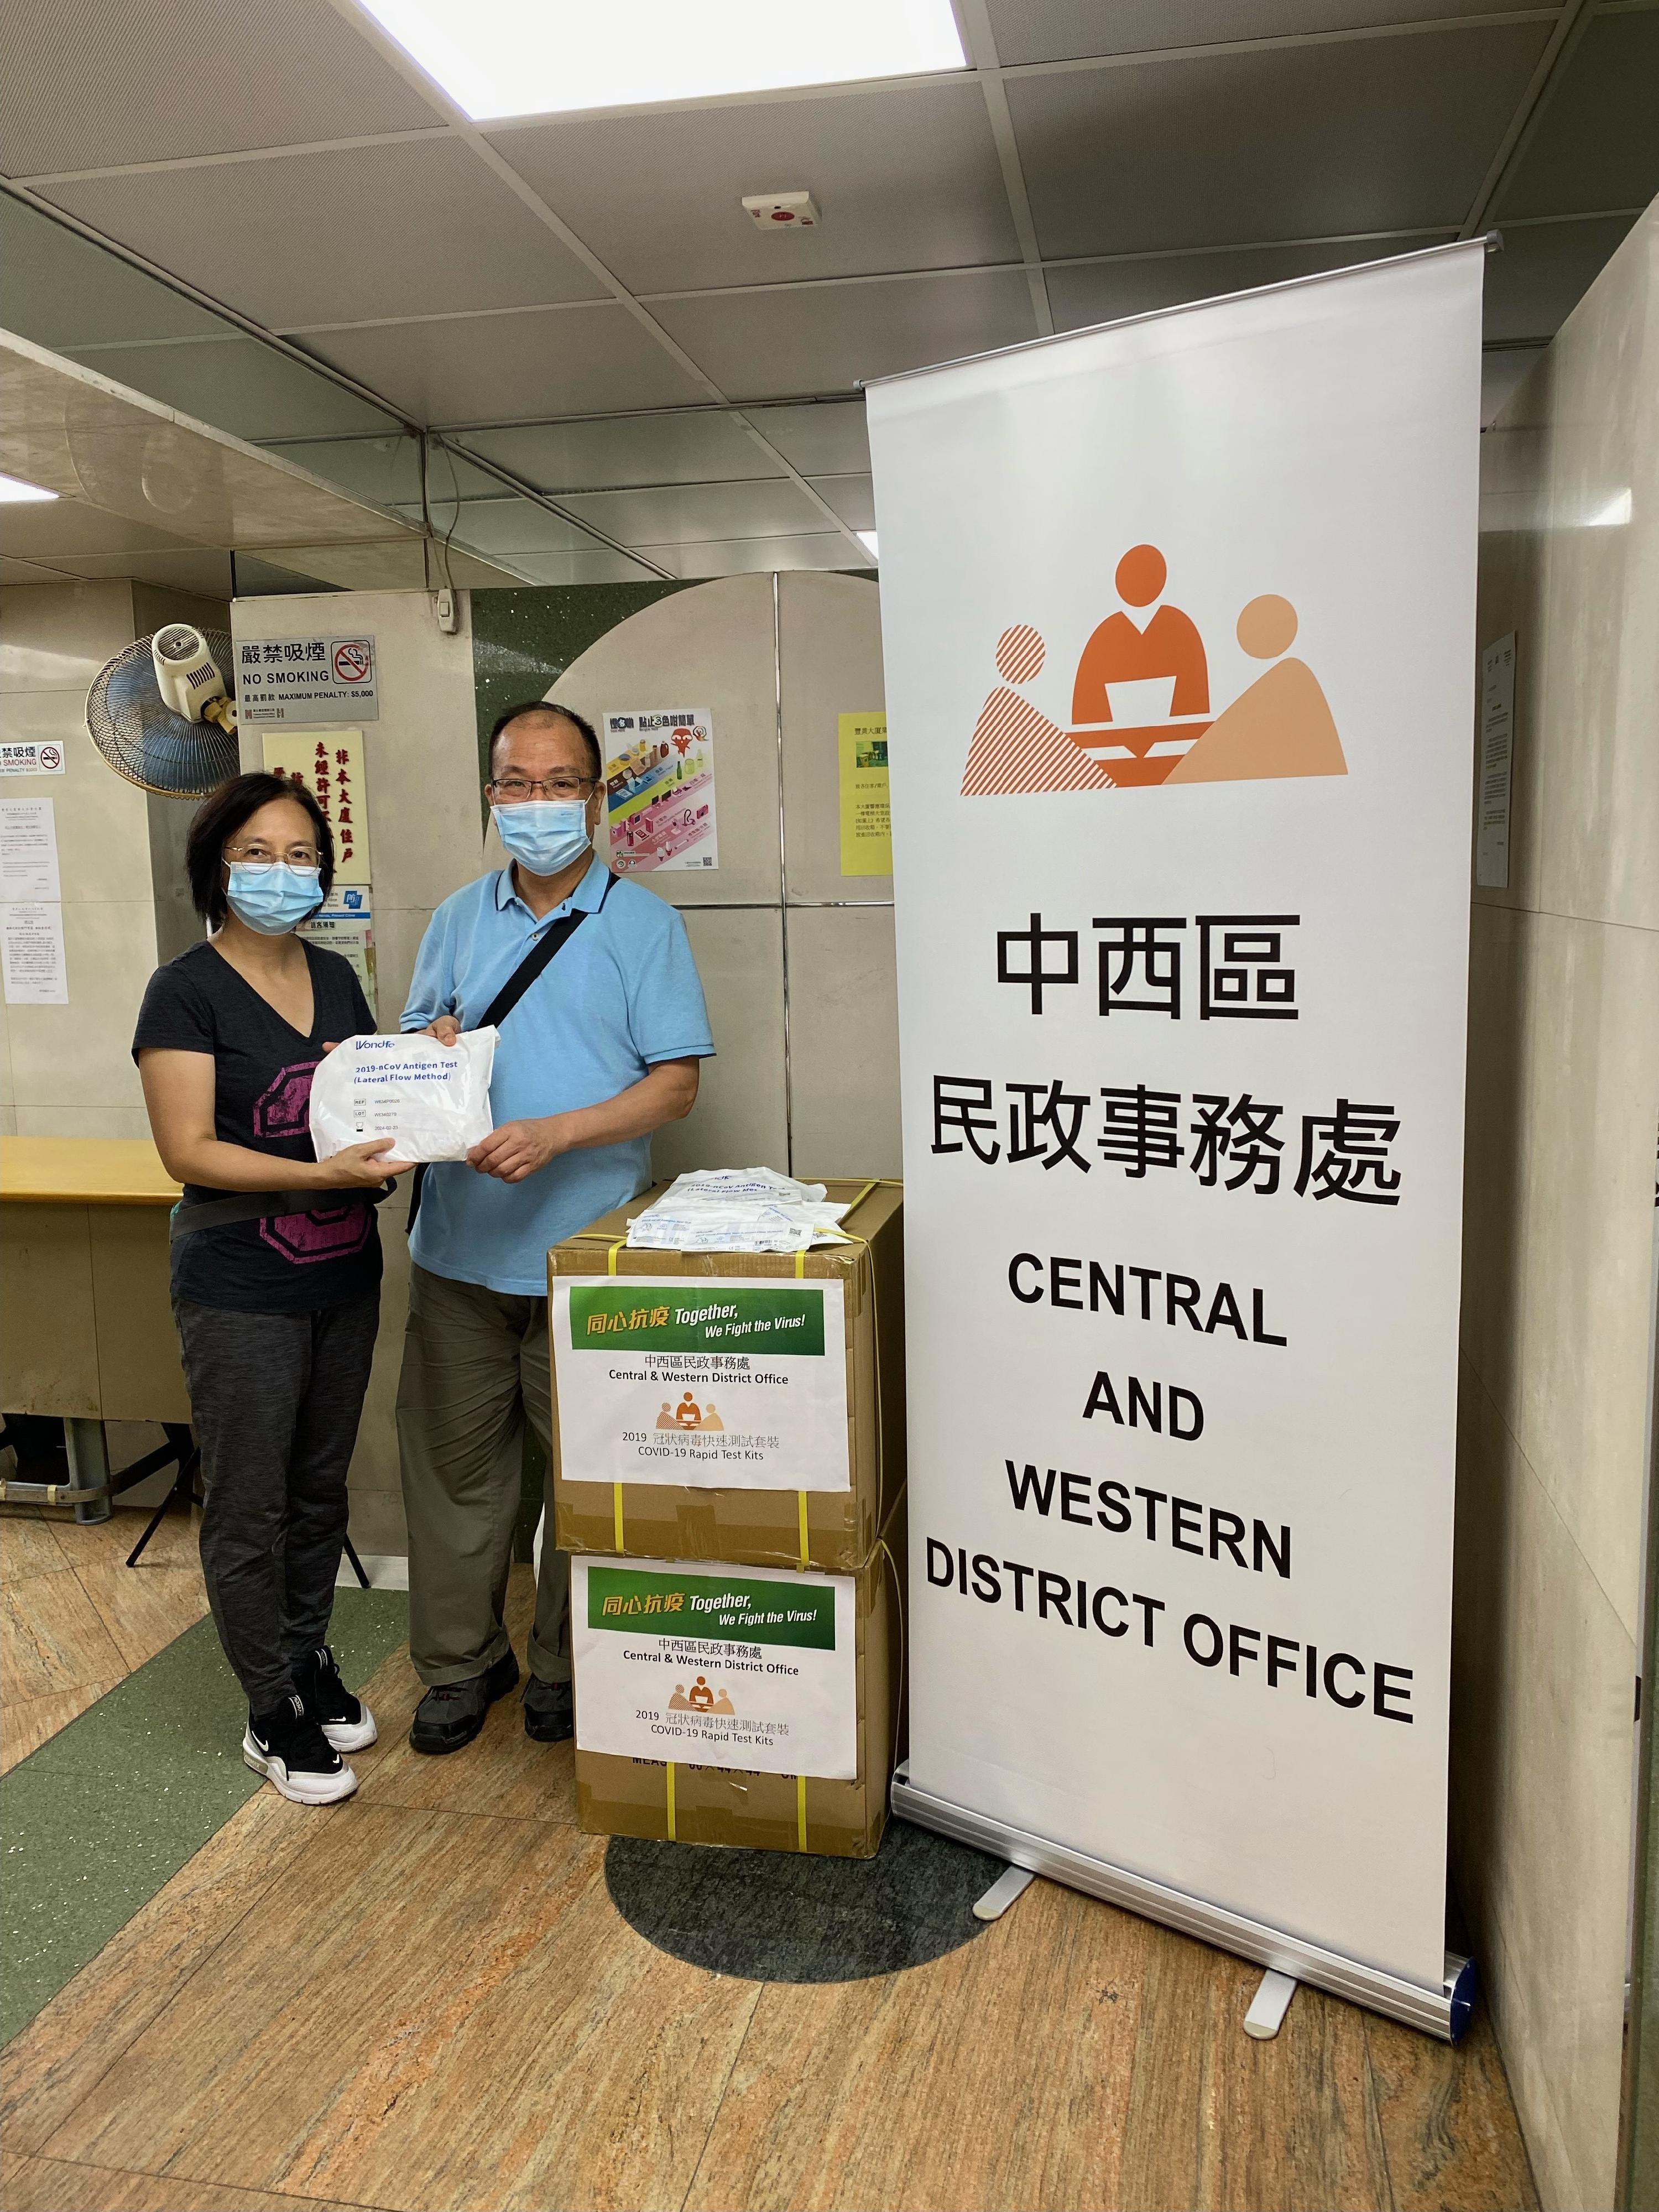 The Central and Western District Office today (July 28) distributed COVID-19 rapid test kits to households, cleansing workers and property management staff living and working in Fung Yip Building for voluntary testing through the owners' corporation.